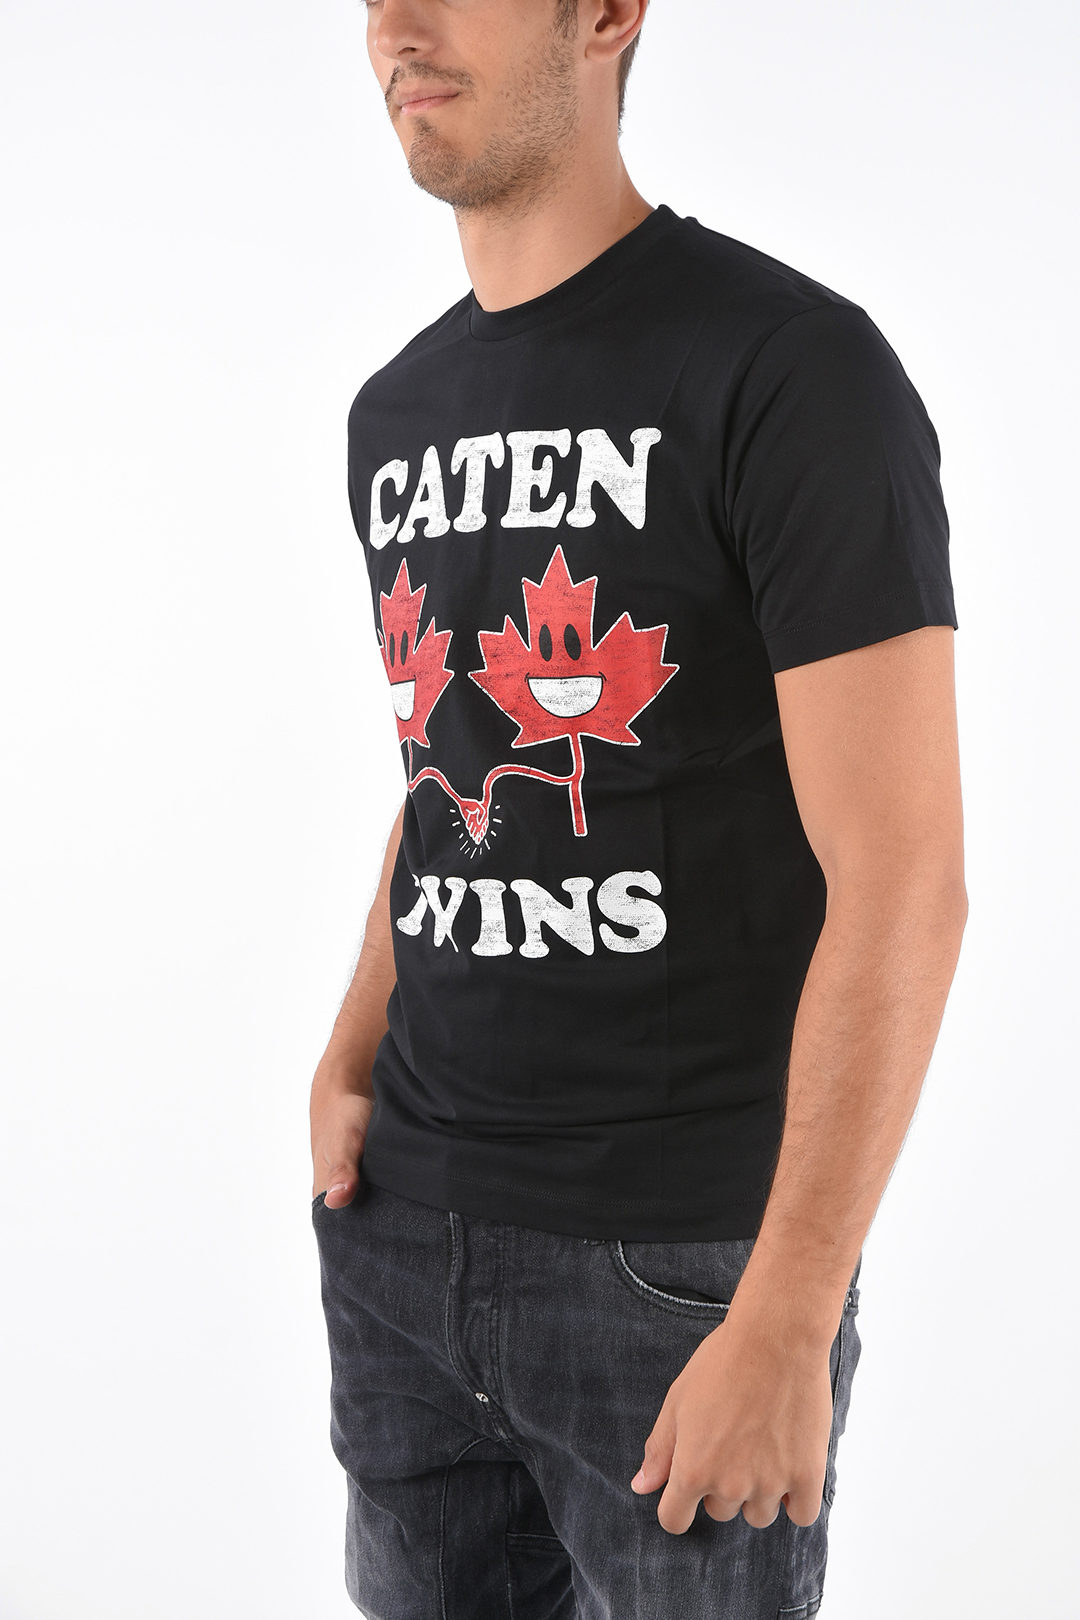 Dsquared2 Cool FIt CATEN TWINS T-shirt - Glamood Outlet